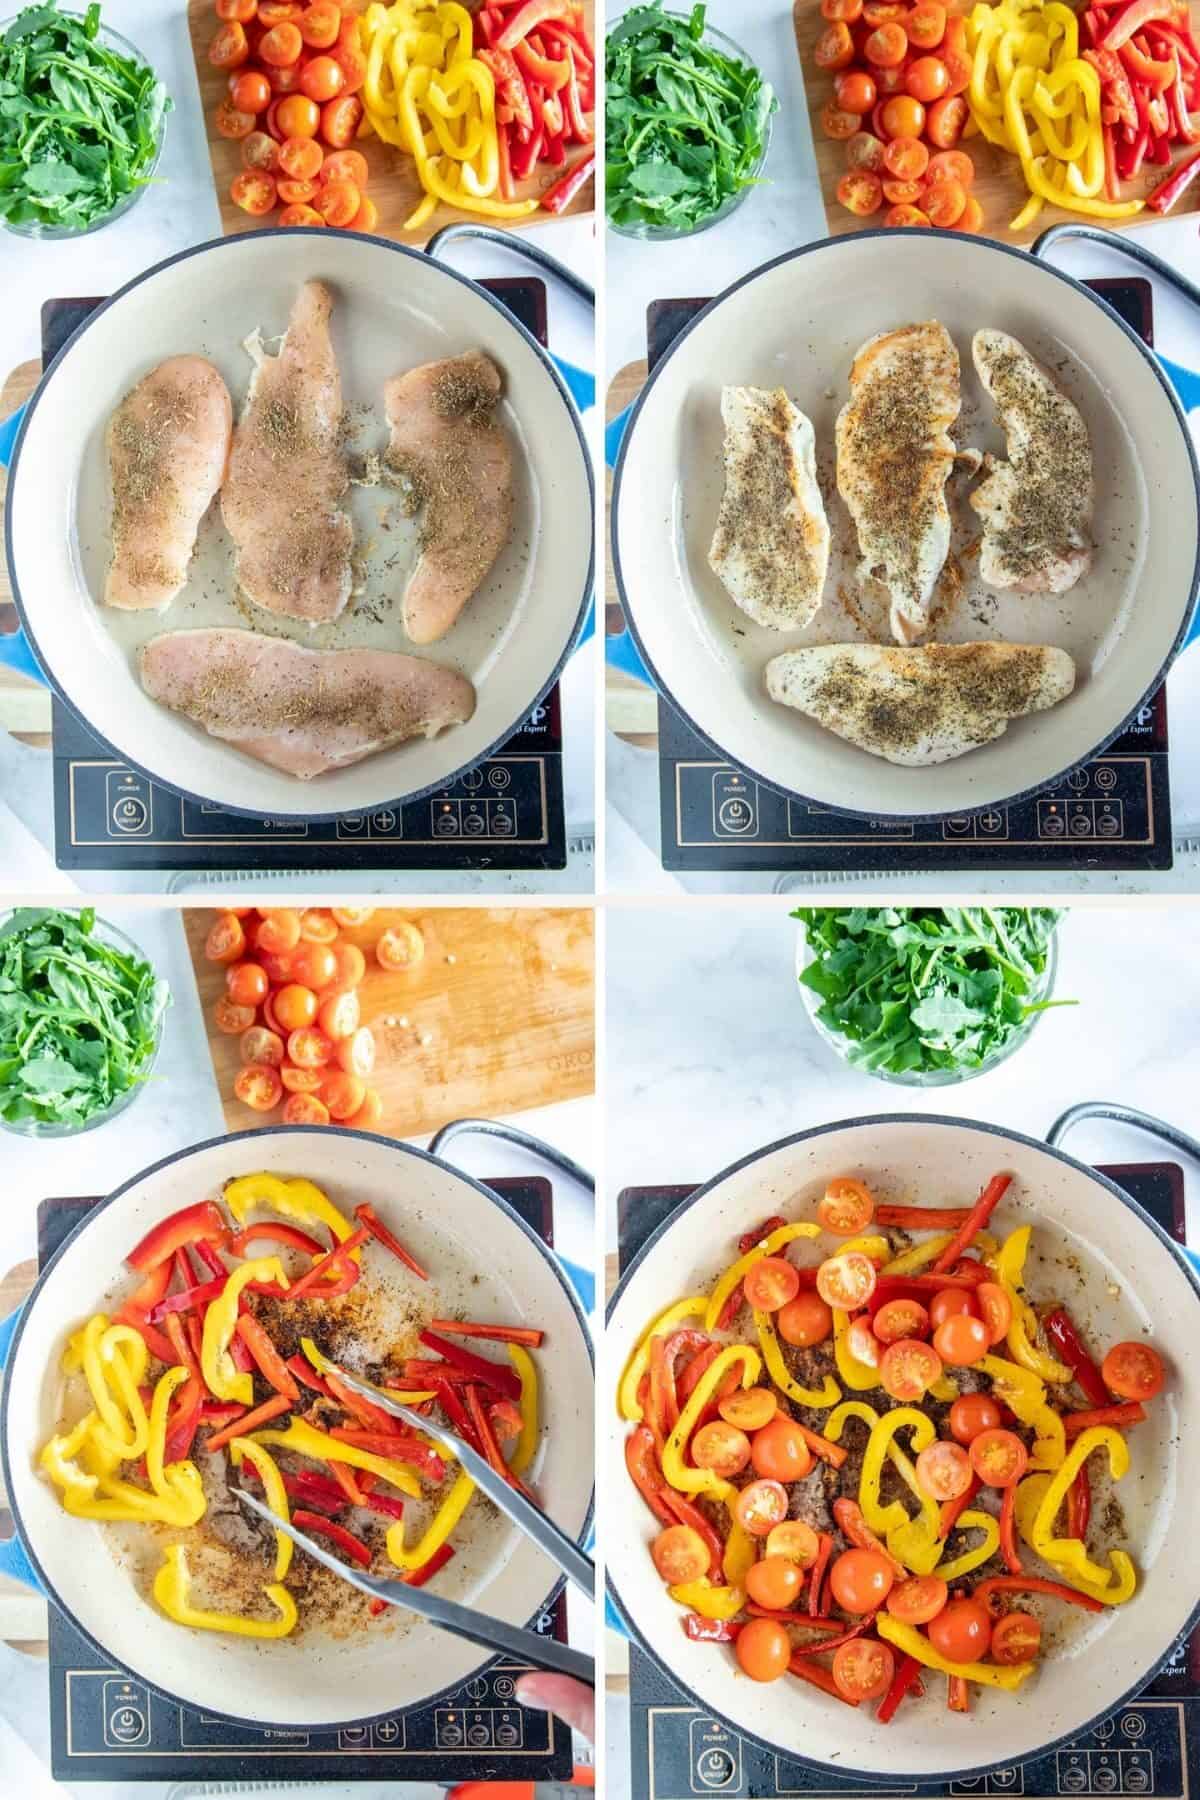 4 pics showing cooking chicken and bell peppers